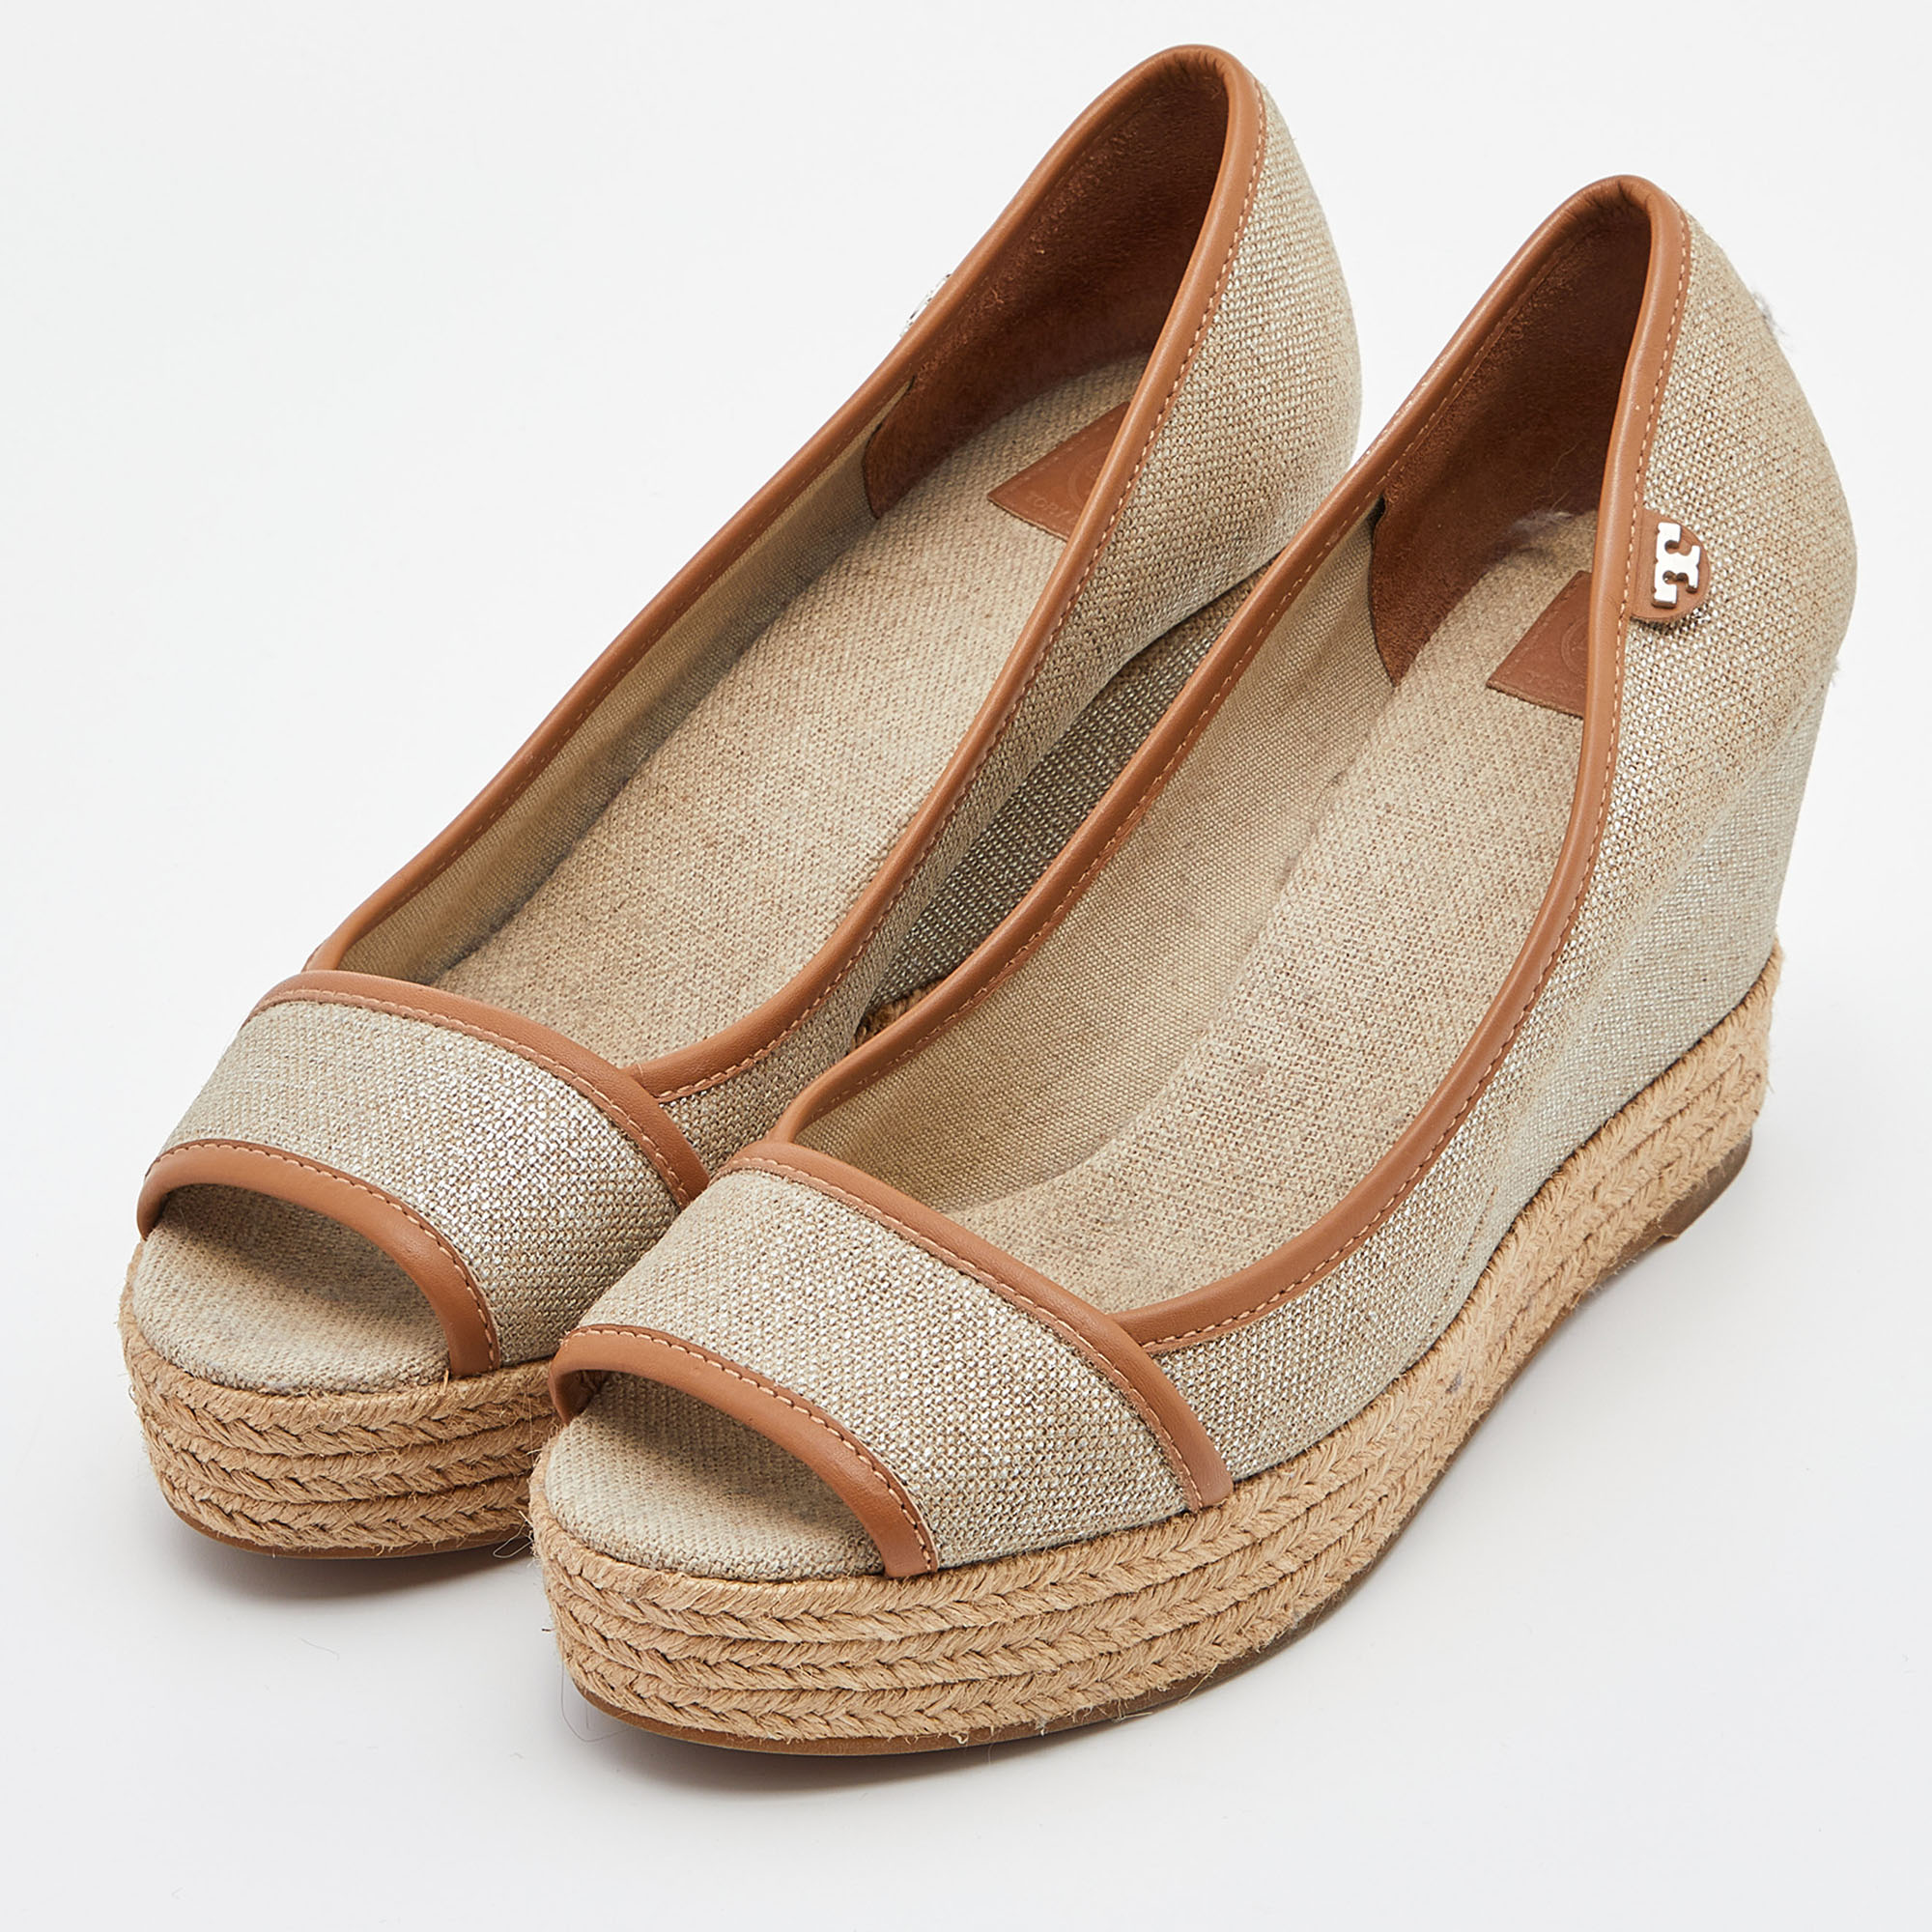 

Tory Burch Beige/Tan Canvas and Leather Espadrille Wedge Pumps Size